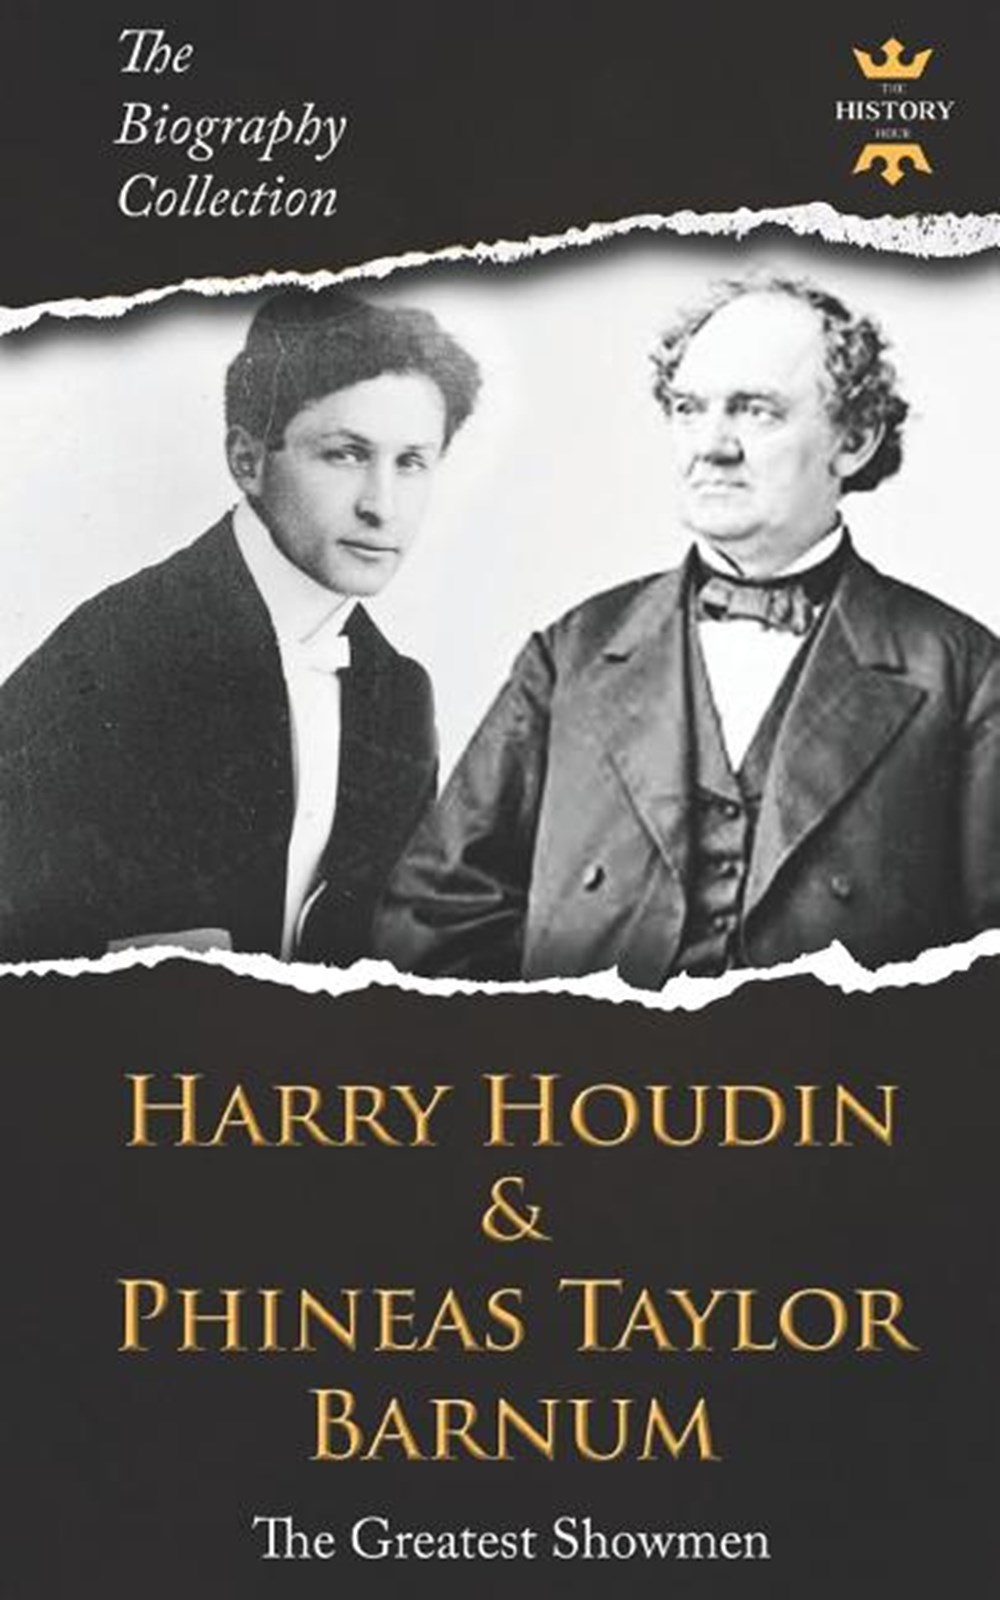 Harry Houdini & Phineas Taylor Barnum The Greatest Showmen. The Biography Collection